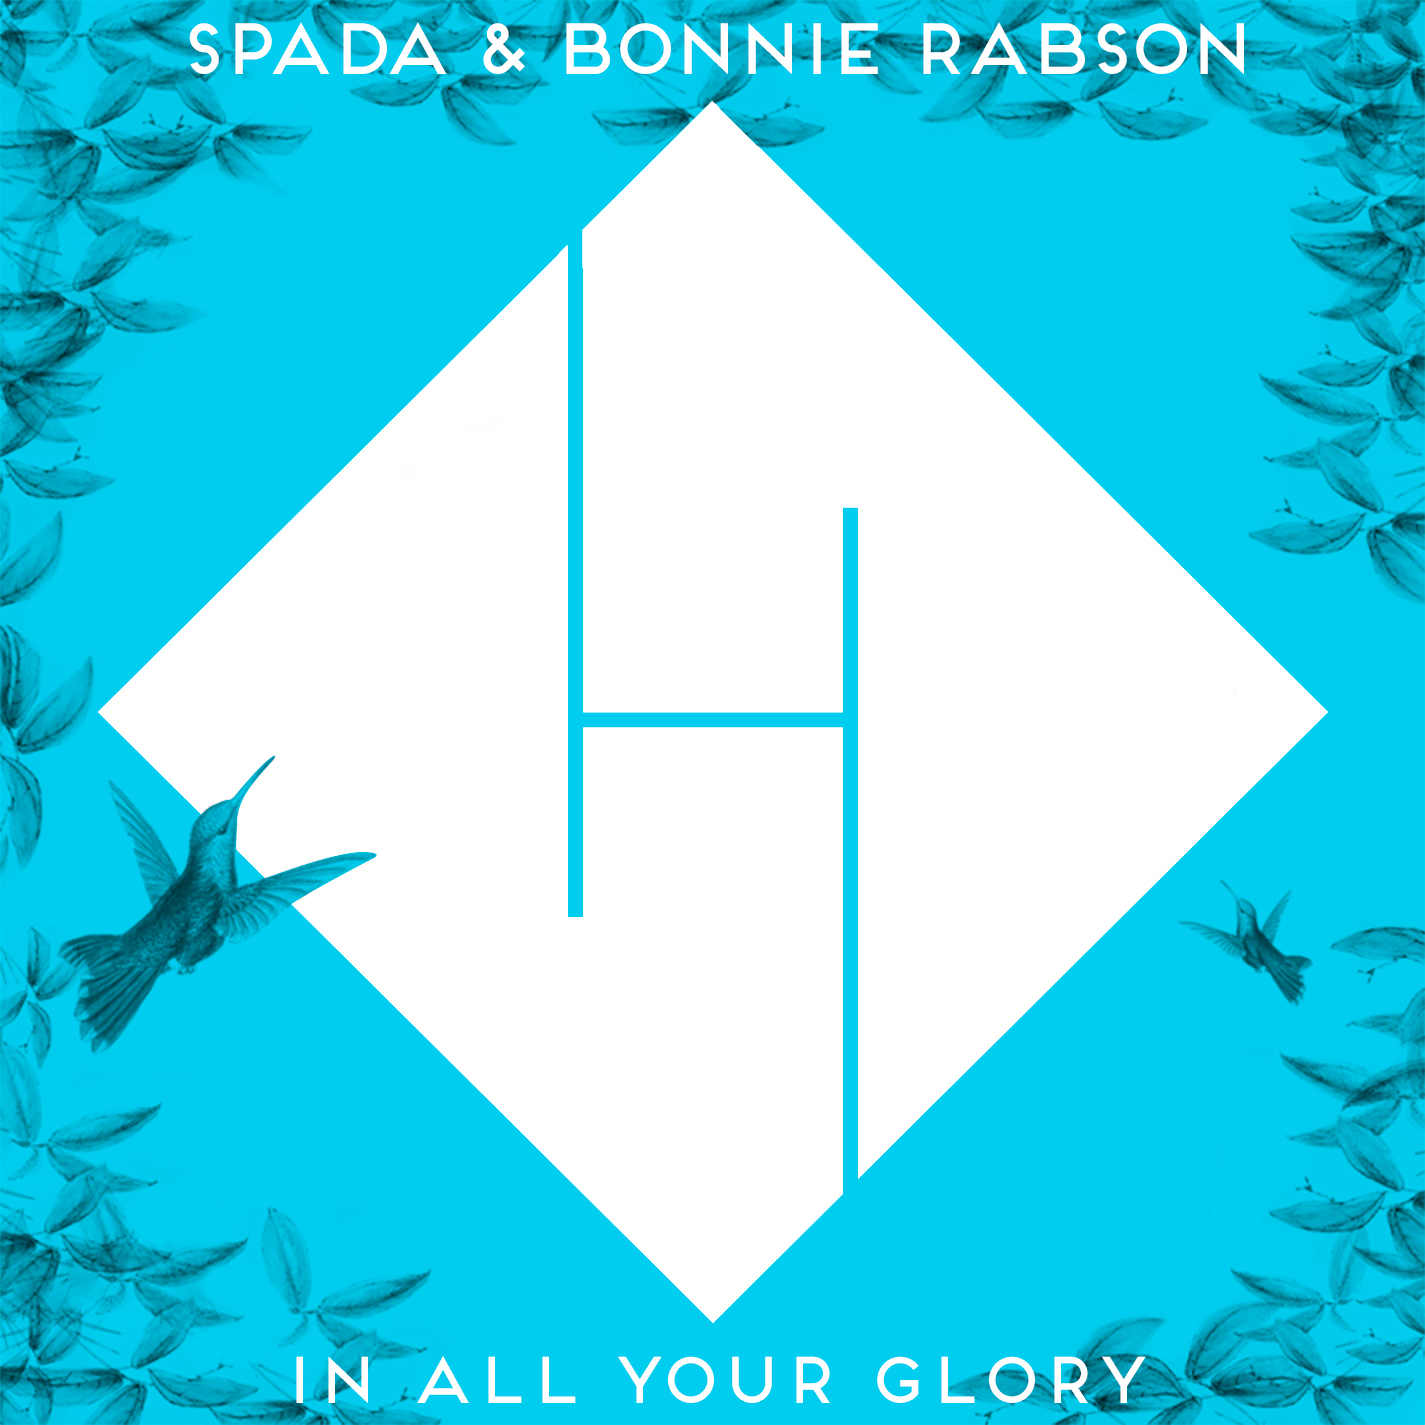 Hent In All Your Glory - Spada & Bonnie Rabson (Remix Boris Brejcha) PREVIEW